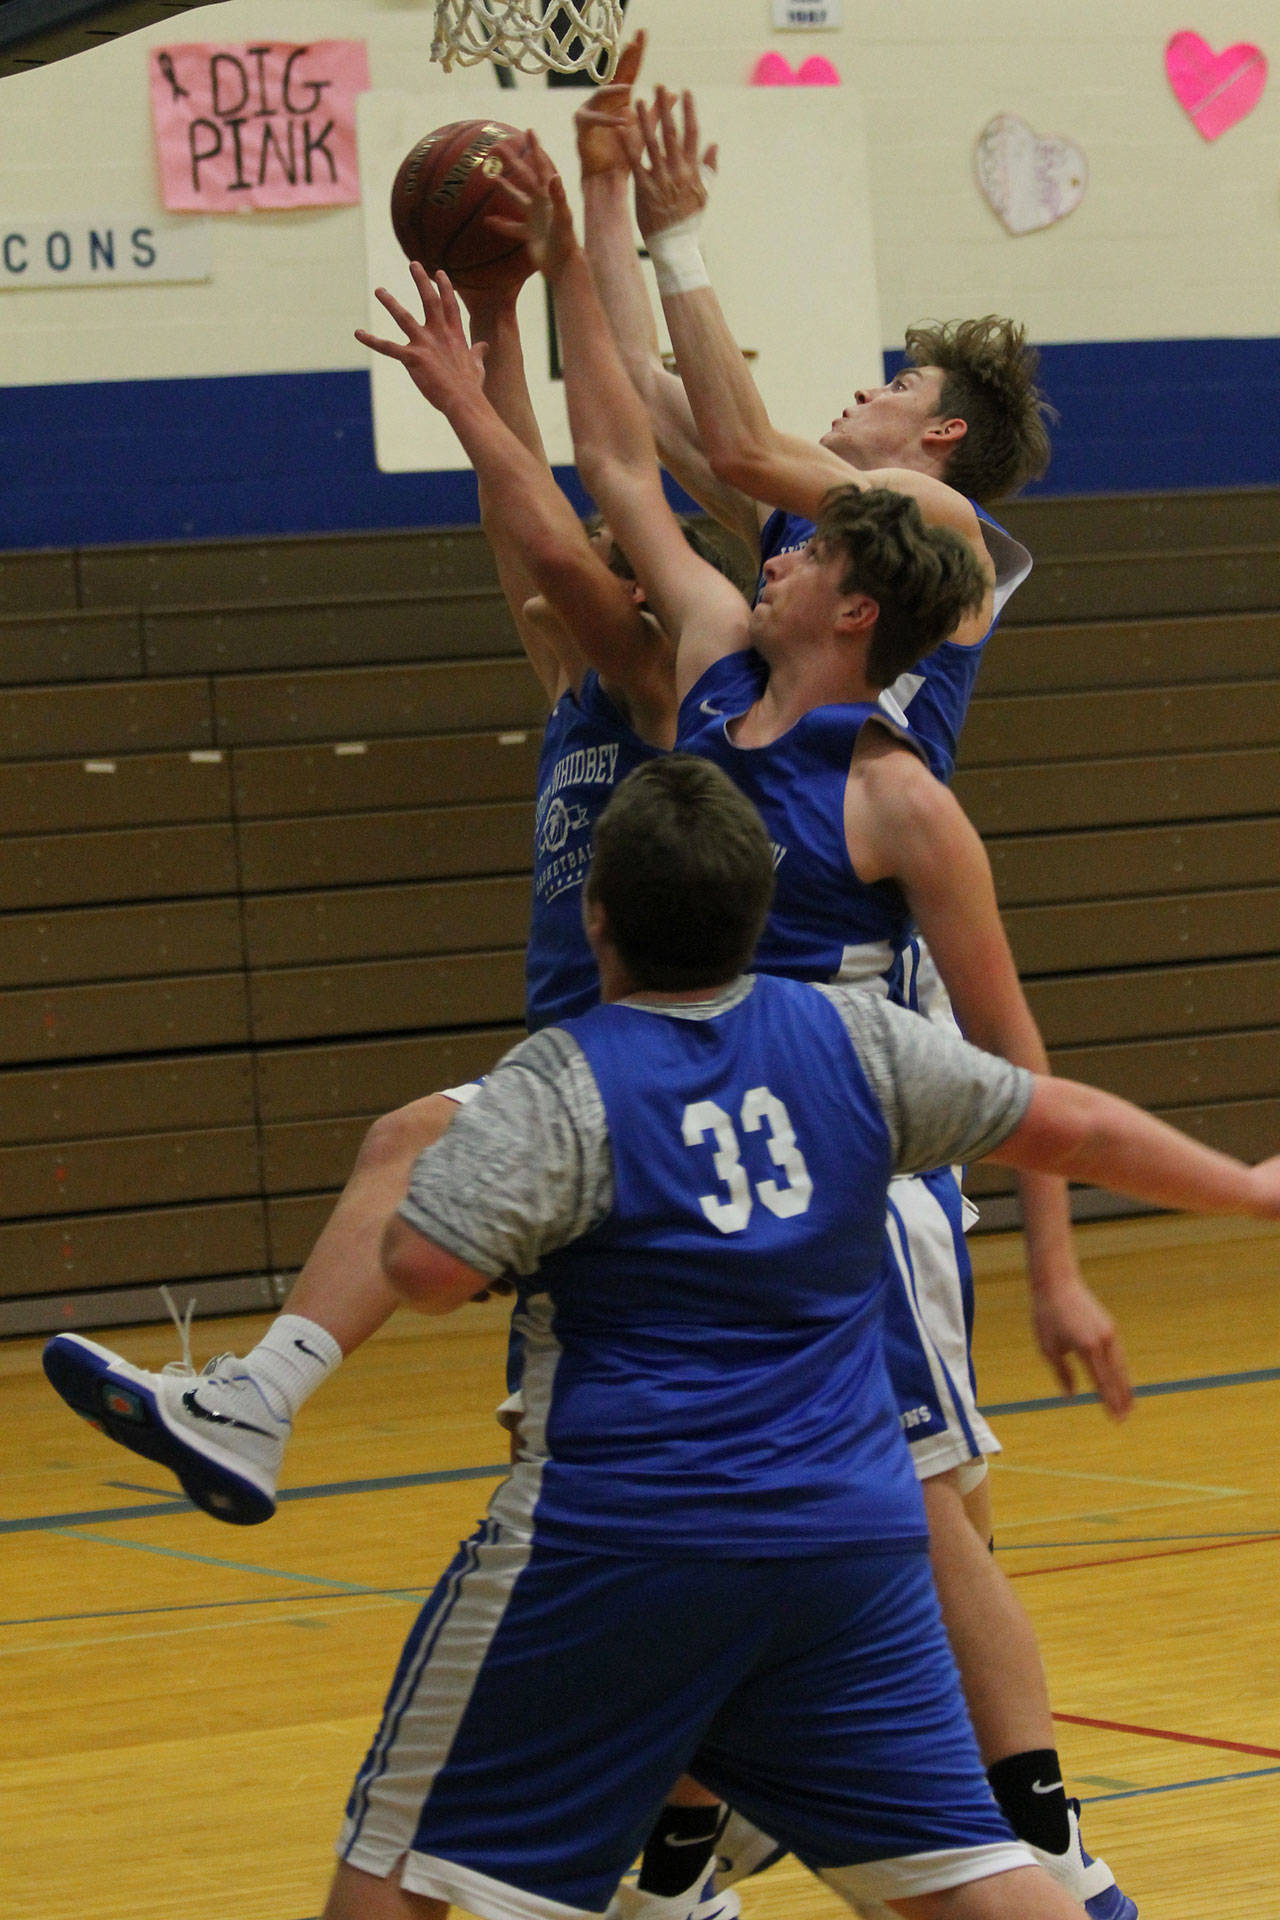 Kole Nelson (center) and Carson Wrightson (taped wrist) battle a teammate for a rebound as Lewis Mattson looks on.(Photo by Jim Waller/South Whidbey Record)